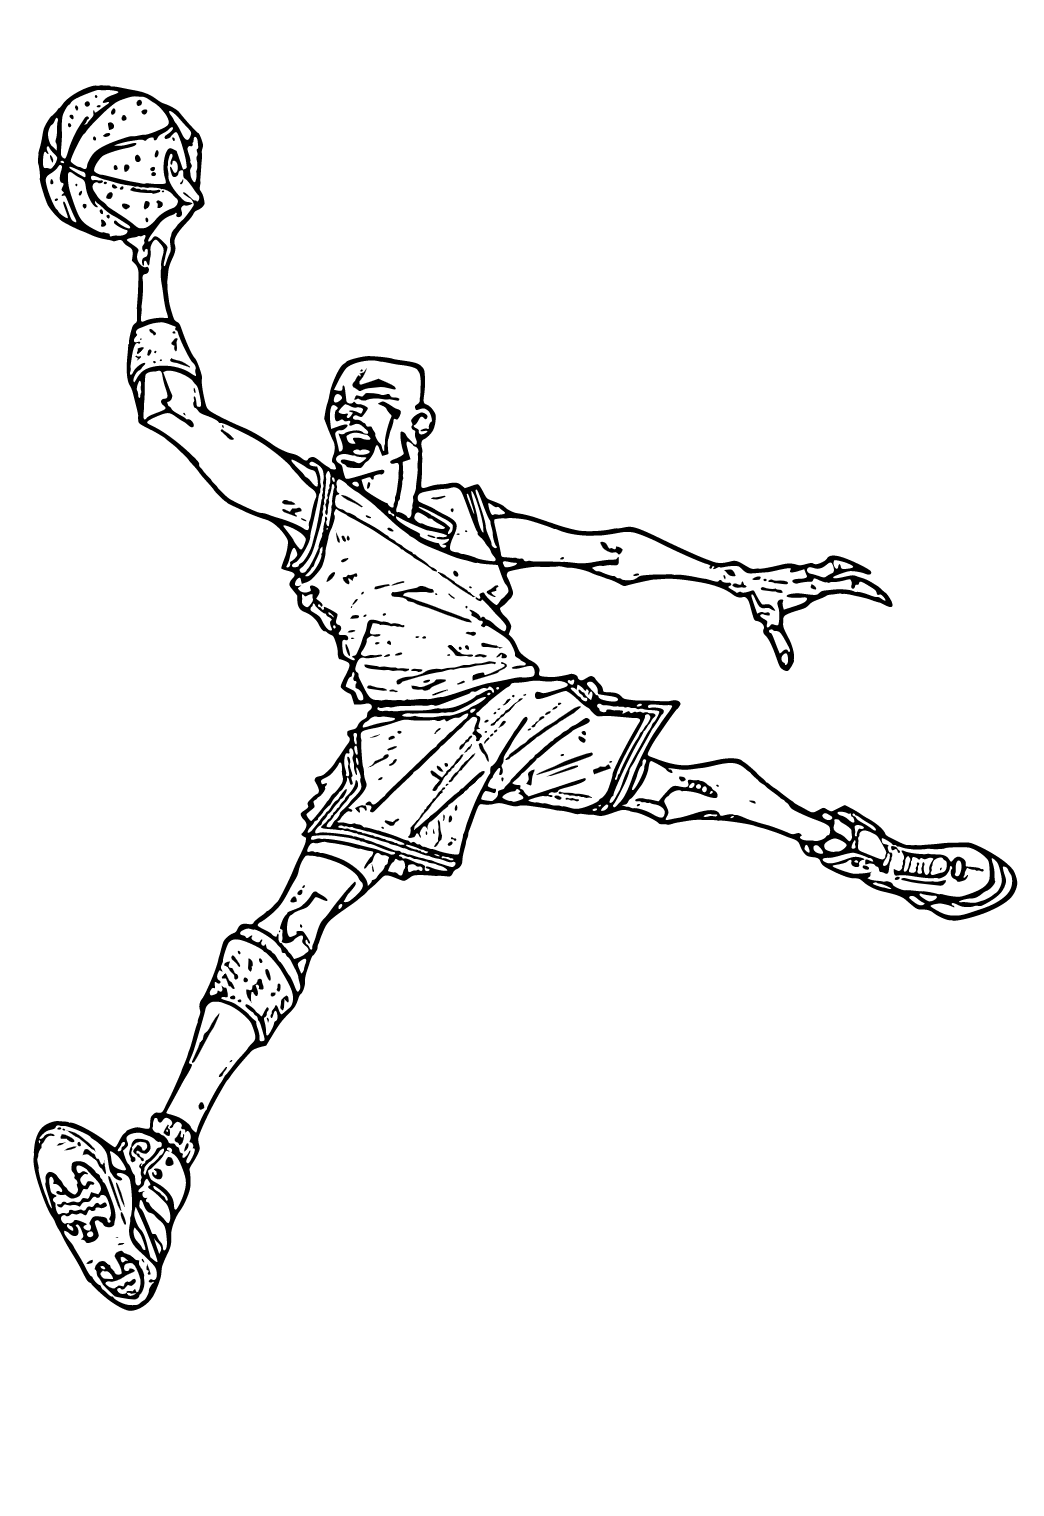 Awesome Michael Jordan Coloring Page Free Printable Coloring Pages For